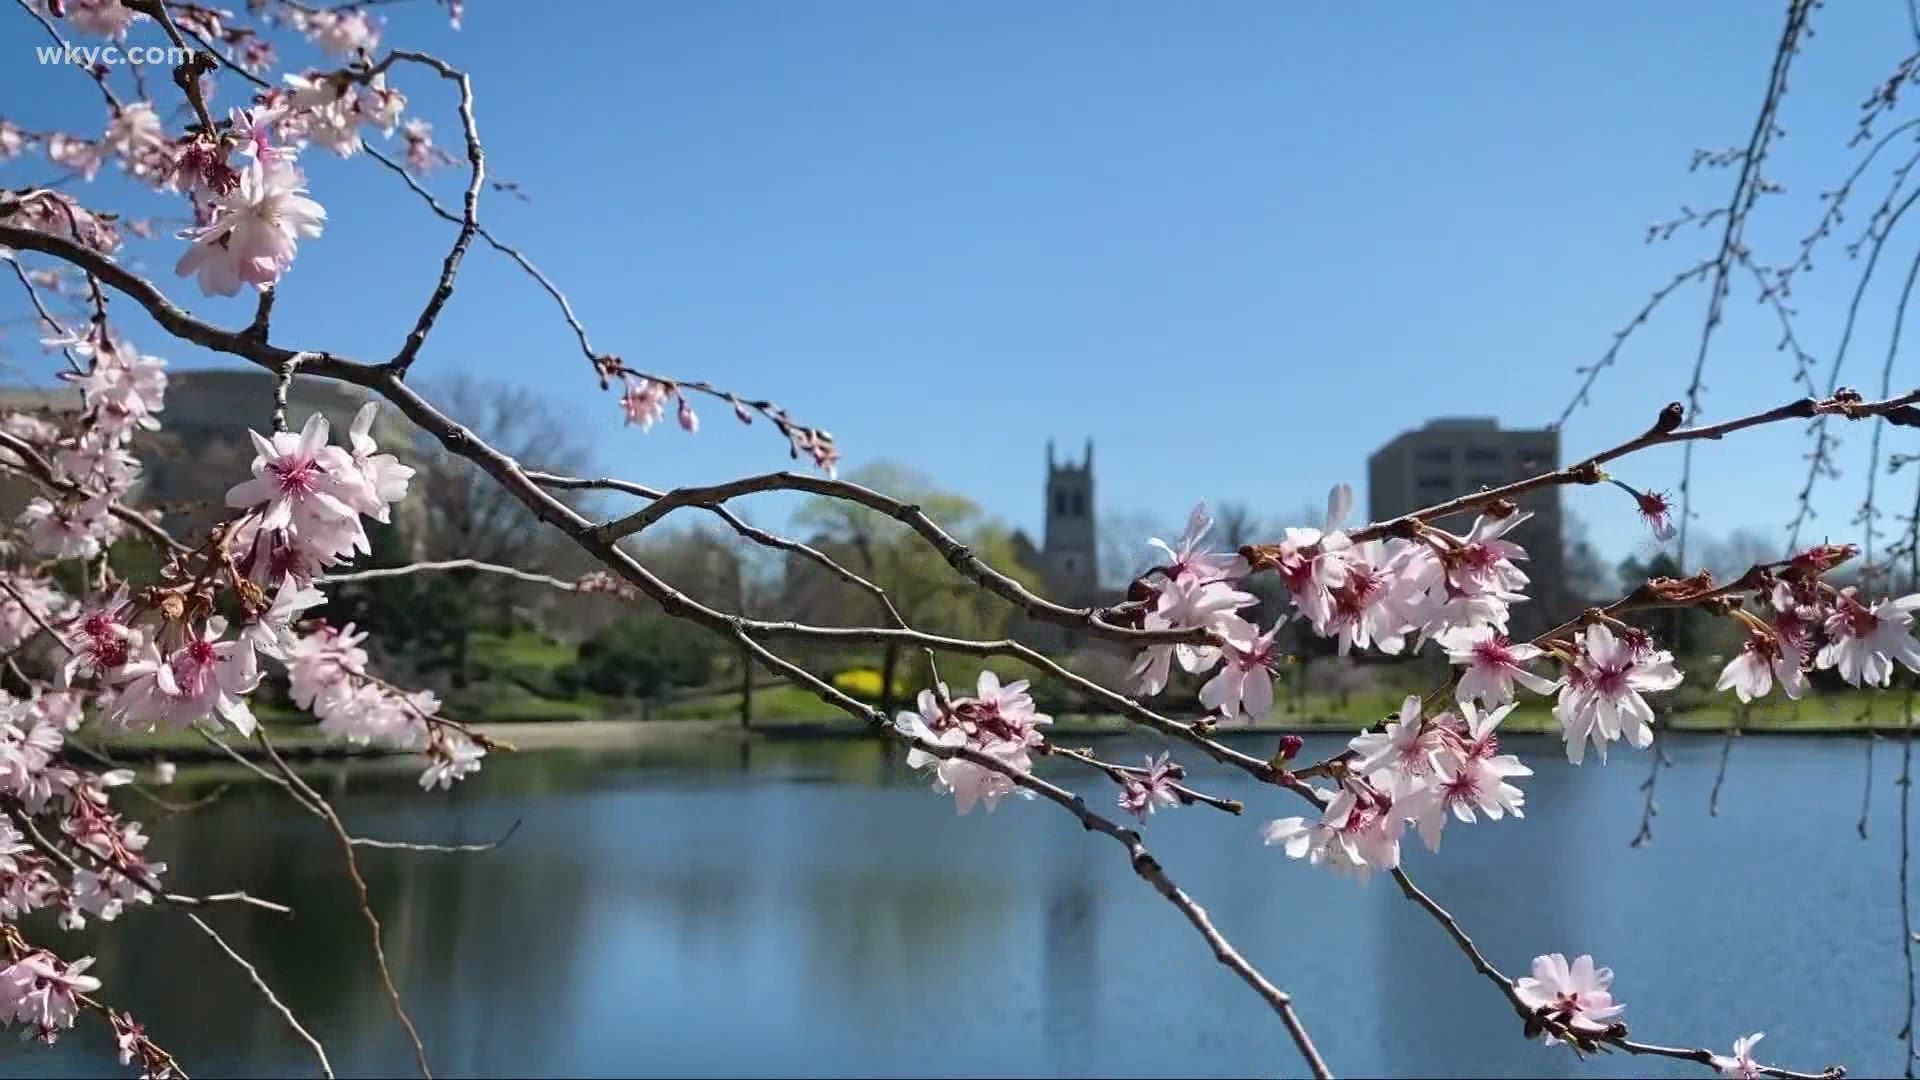 Spring is here! It's time to explore two Cleveland favorites: Cherry blossoms at Wade Lagoon and Dafodill Hill at Lake View Cemetery.